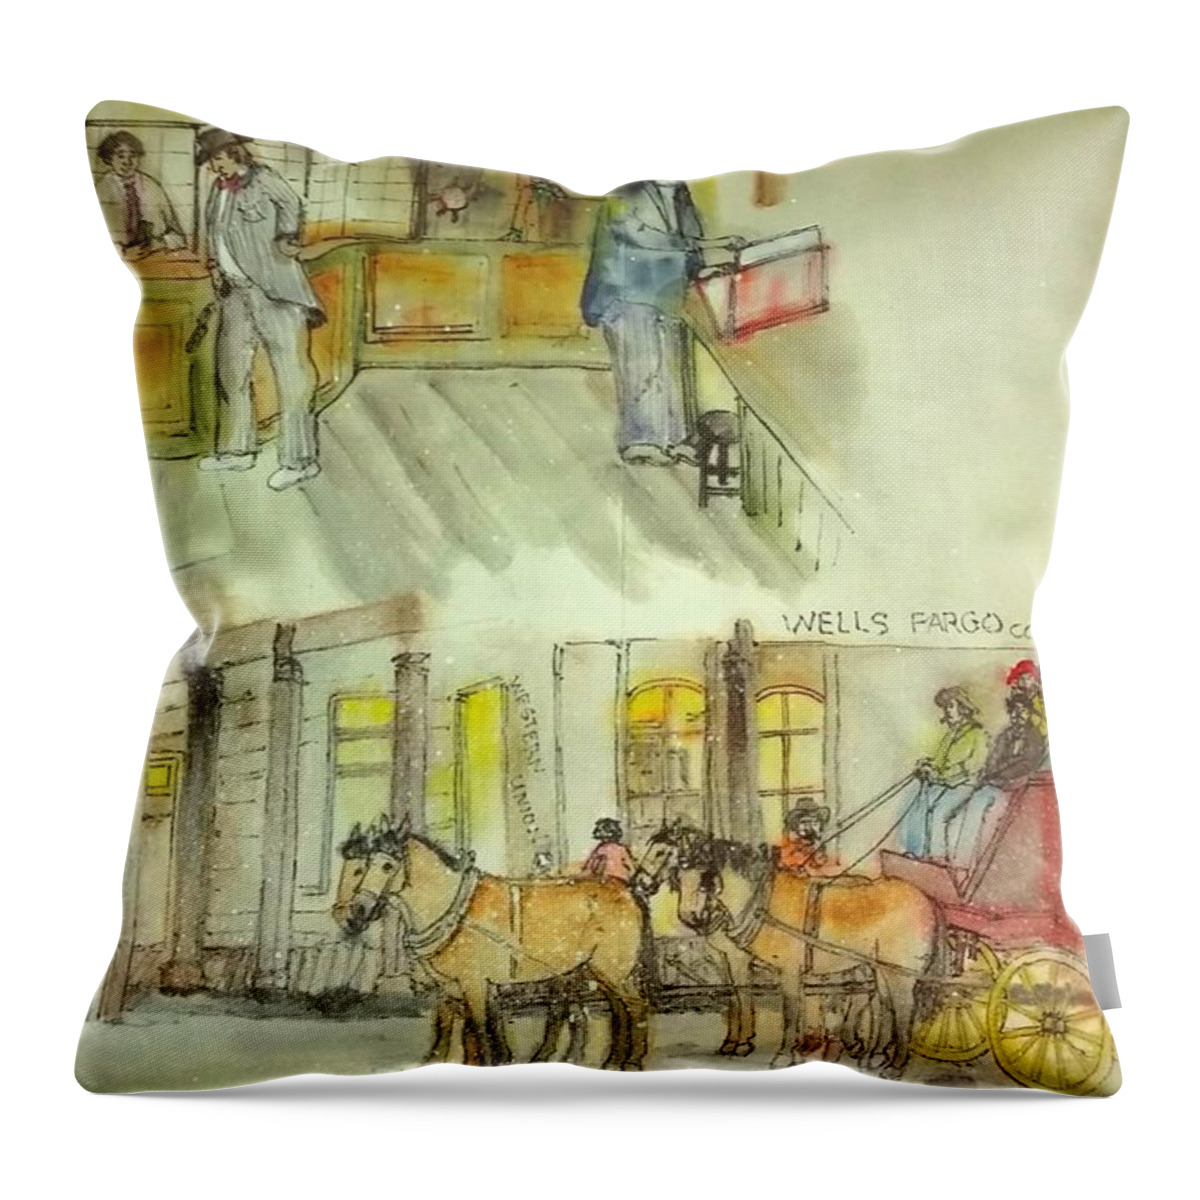 Western Art. My Way. Chinese Traditional. Throw Pillow featuring the painting the ole' West my way album #23 by Debbi Saccomanno Chan